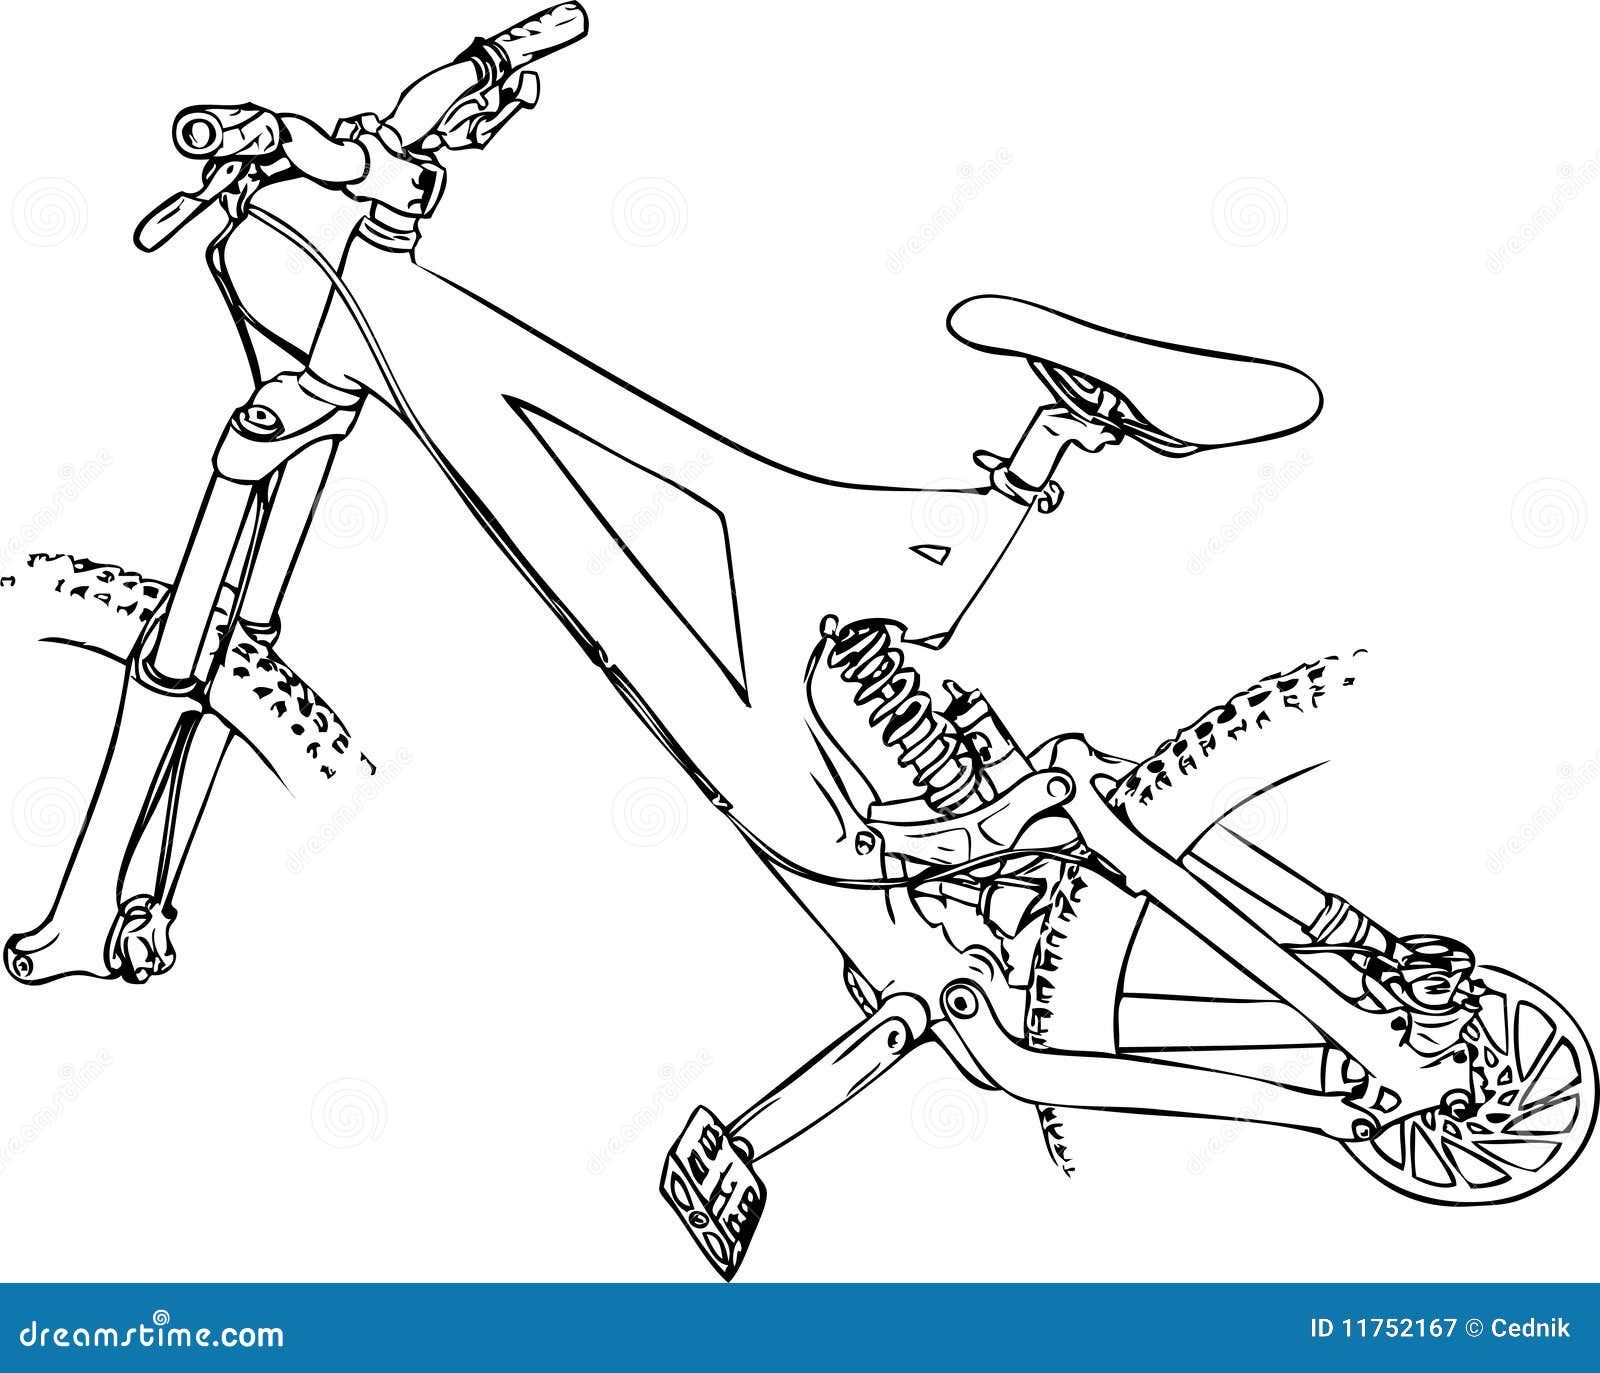 Mountine Bike Vector Drawing Royalty Free Stock Photography - Image